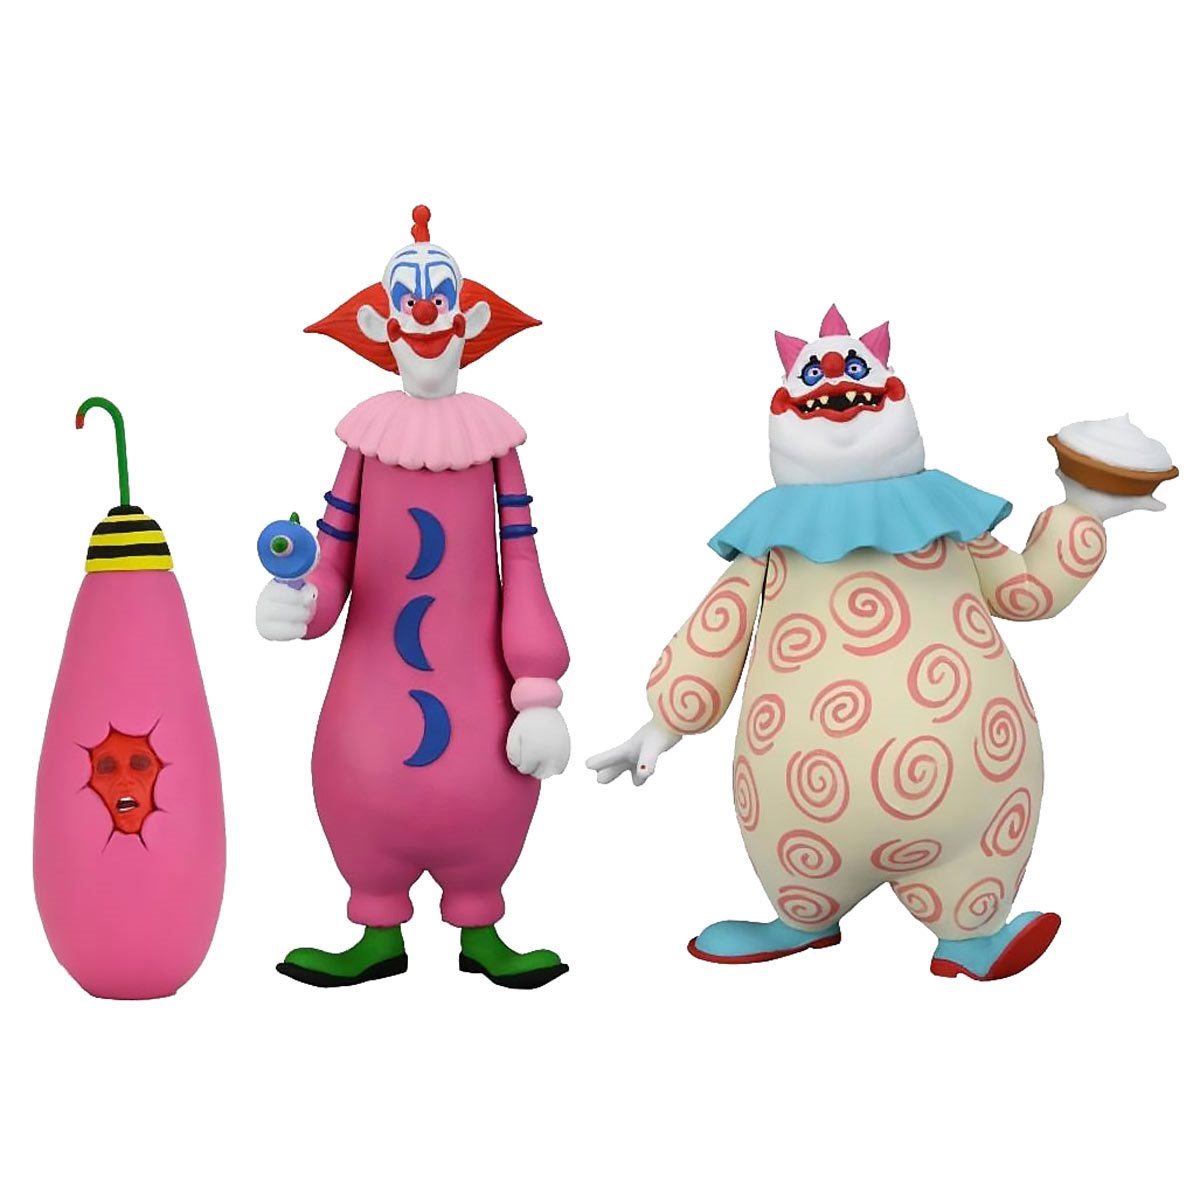 NECA - Toony Terrors Slim & Jumbo (Killer Klowns From Outer Space) 6" Action Figure 2-Pack